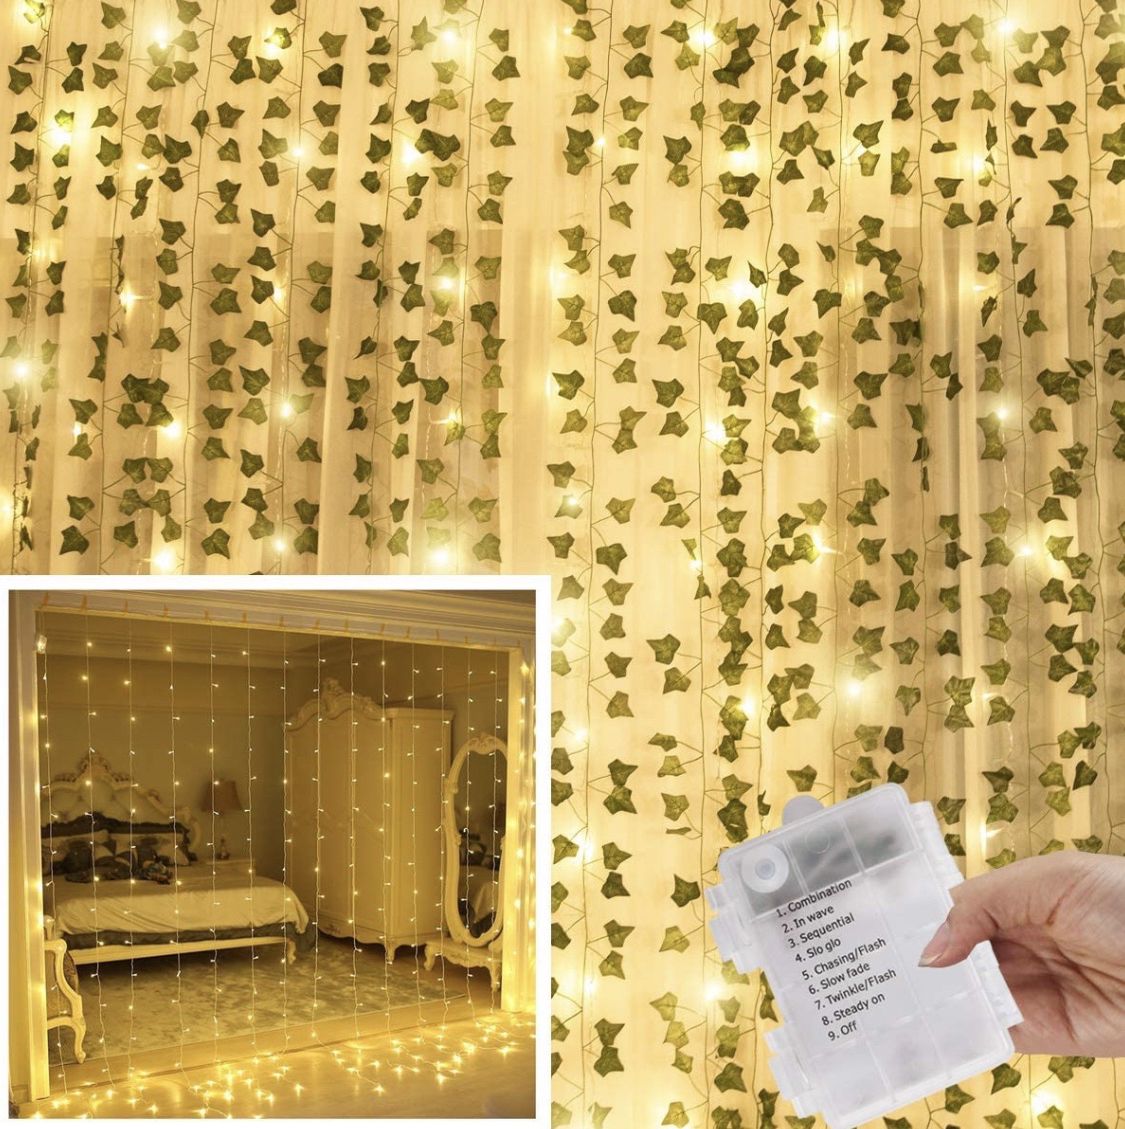 KASZOO 12 Pack Artificial Ivy Leaf Plants with 240 LED Window Curtain String Lights, Fake Plants Vine Hanging Garland, Hanging for Wall Party Wedding